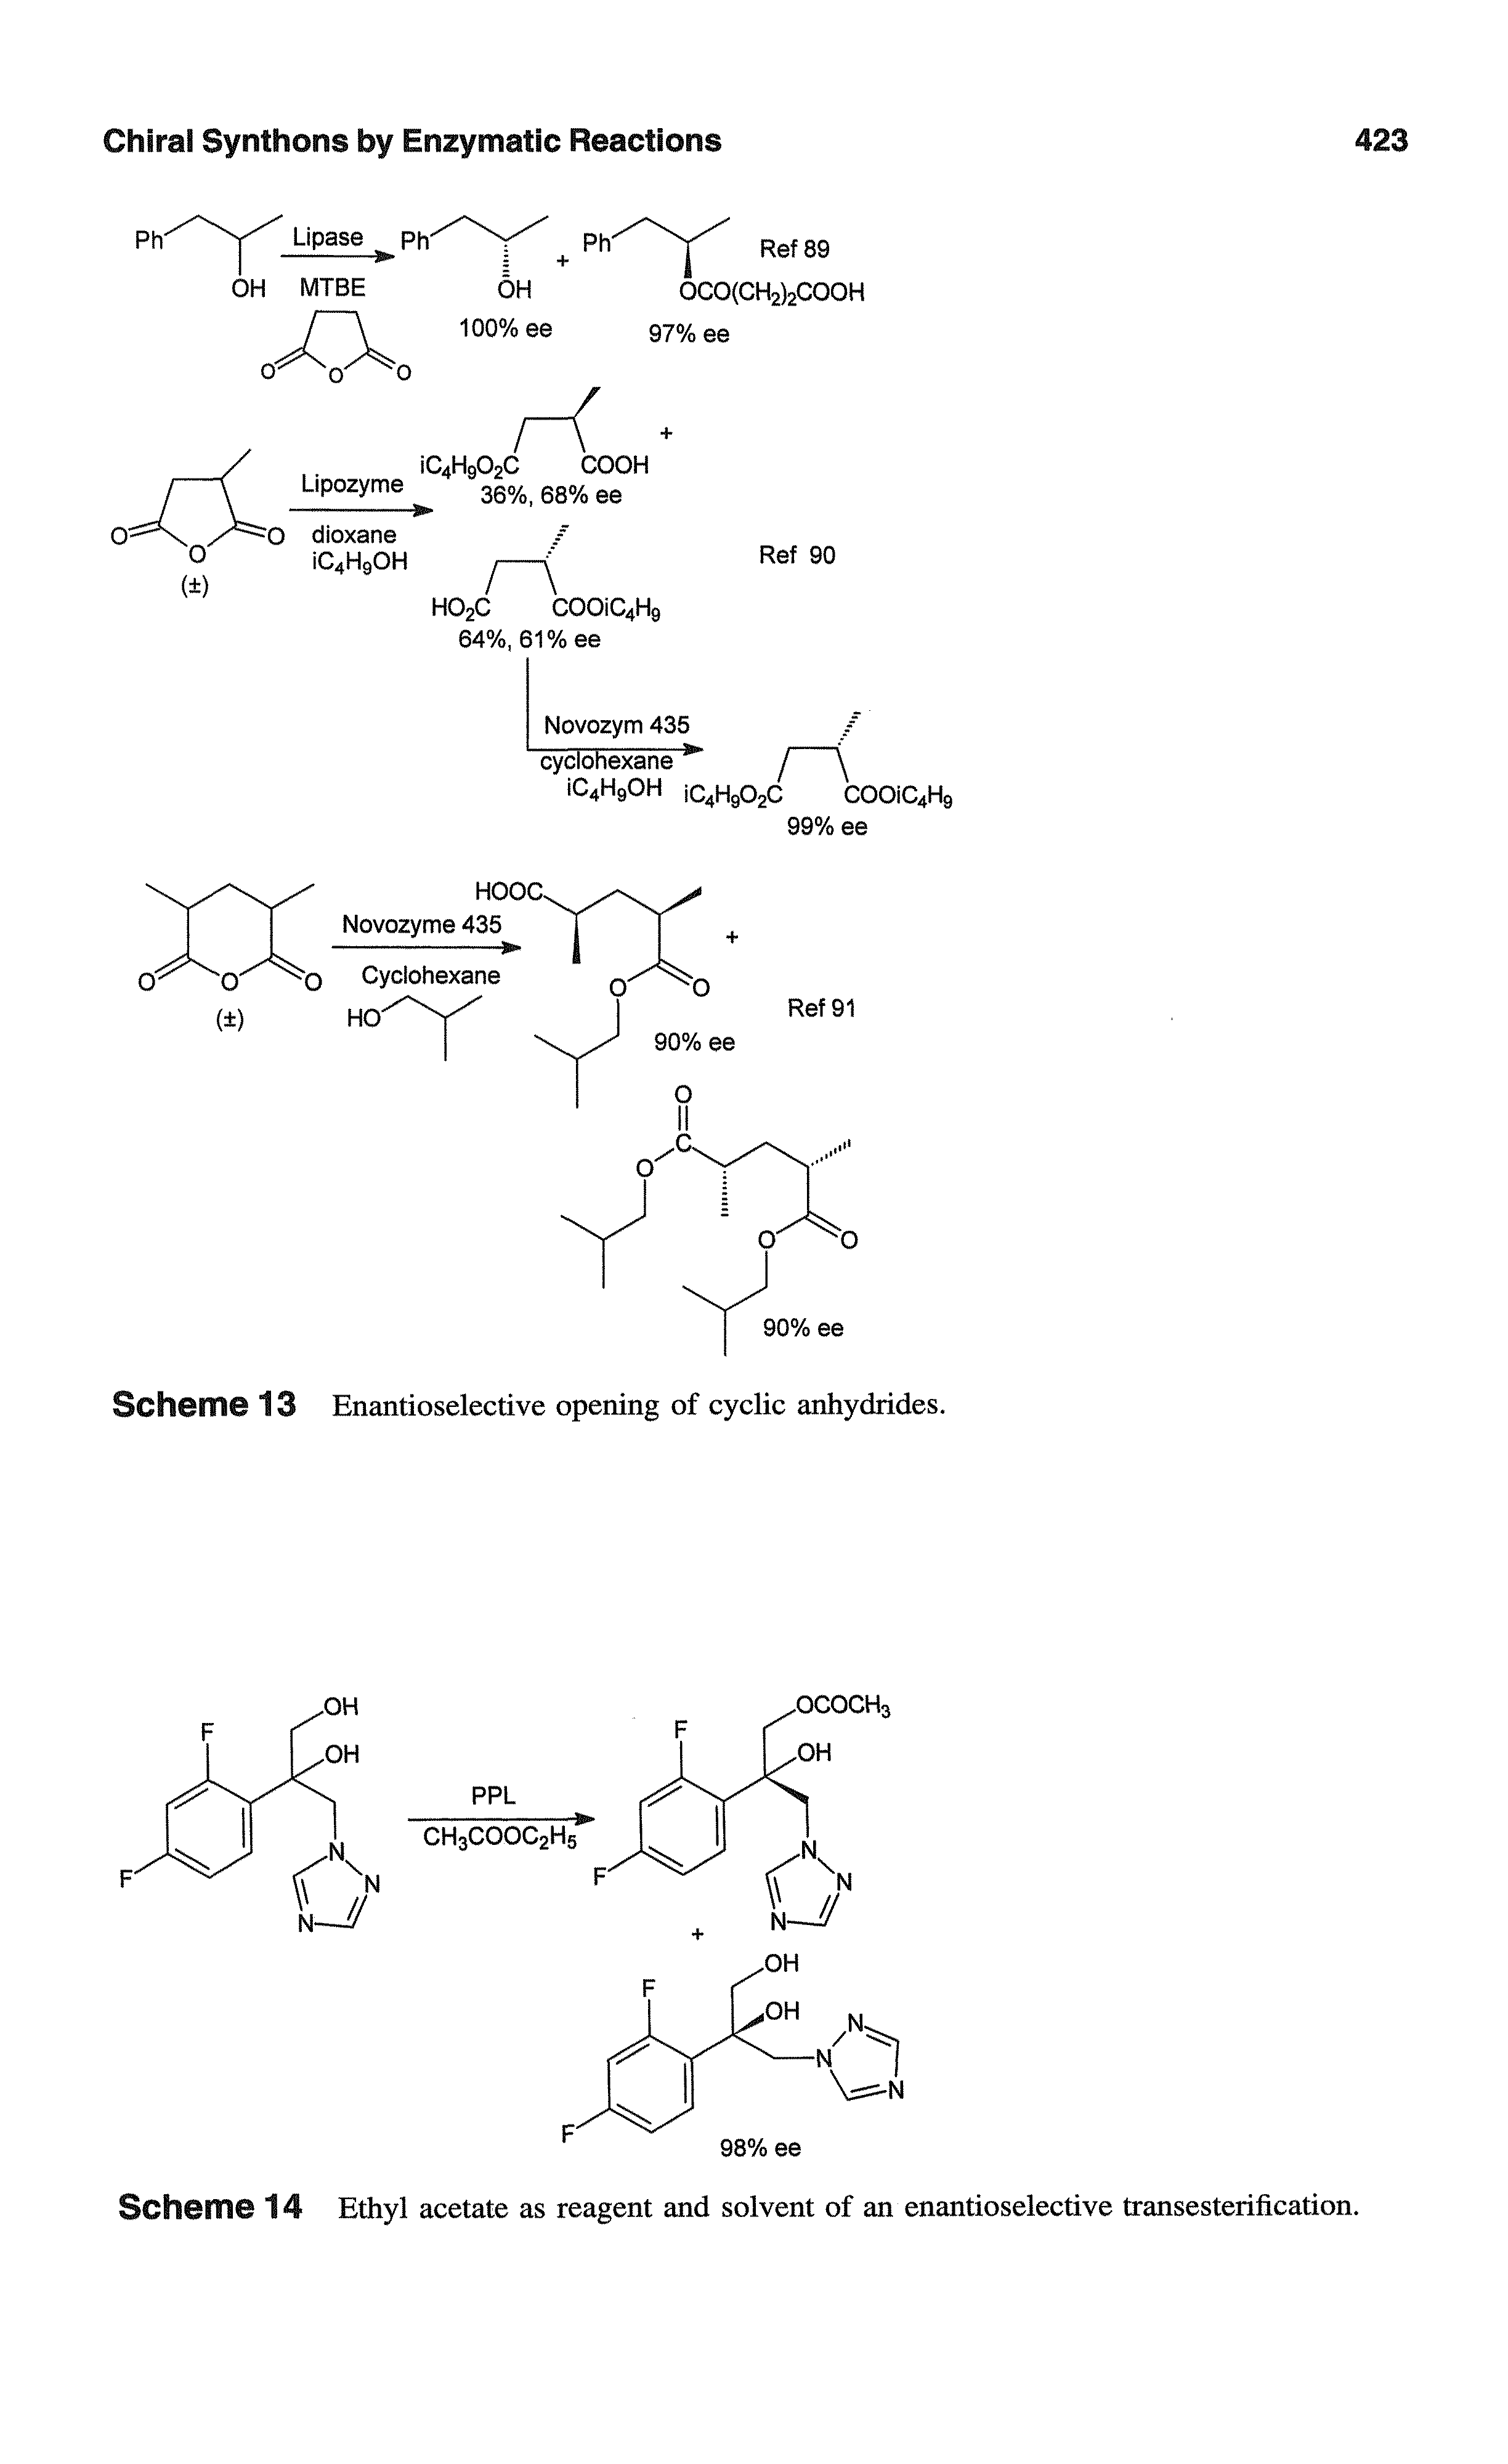 Scheme 14 Ethyl acetate as reagent and solvent of an enantioselective transesterification.